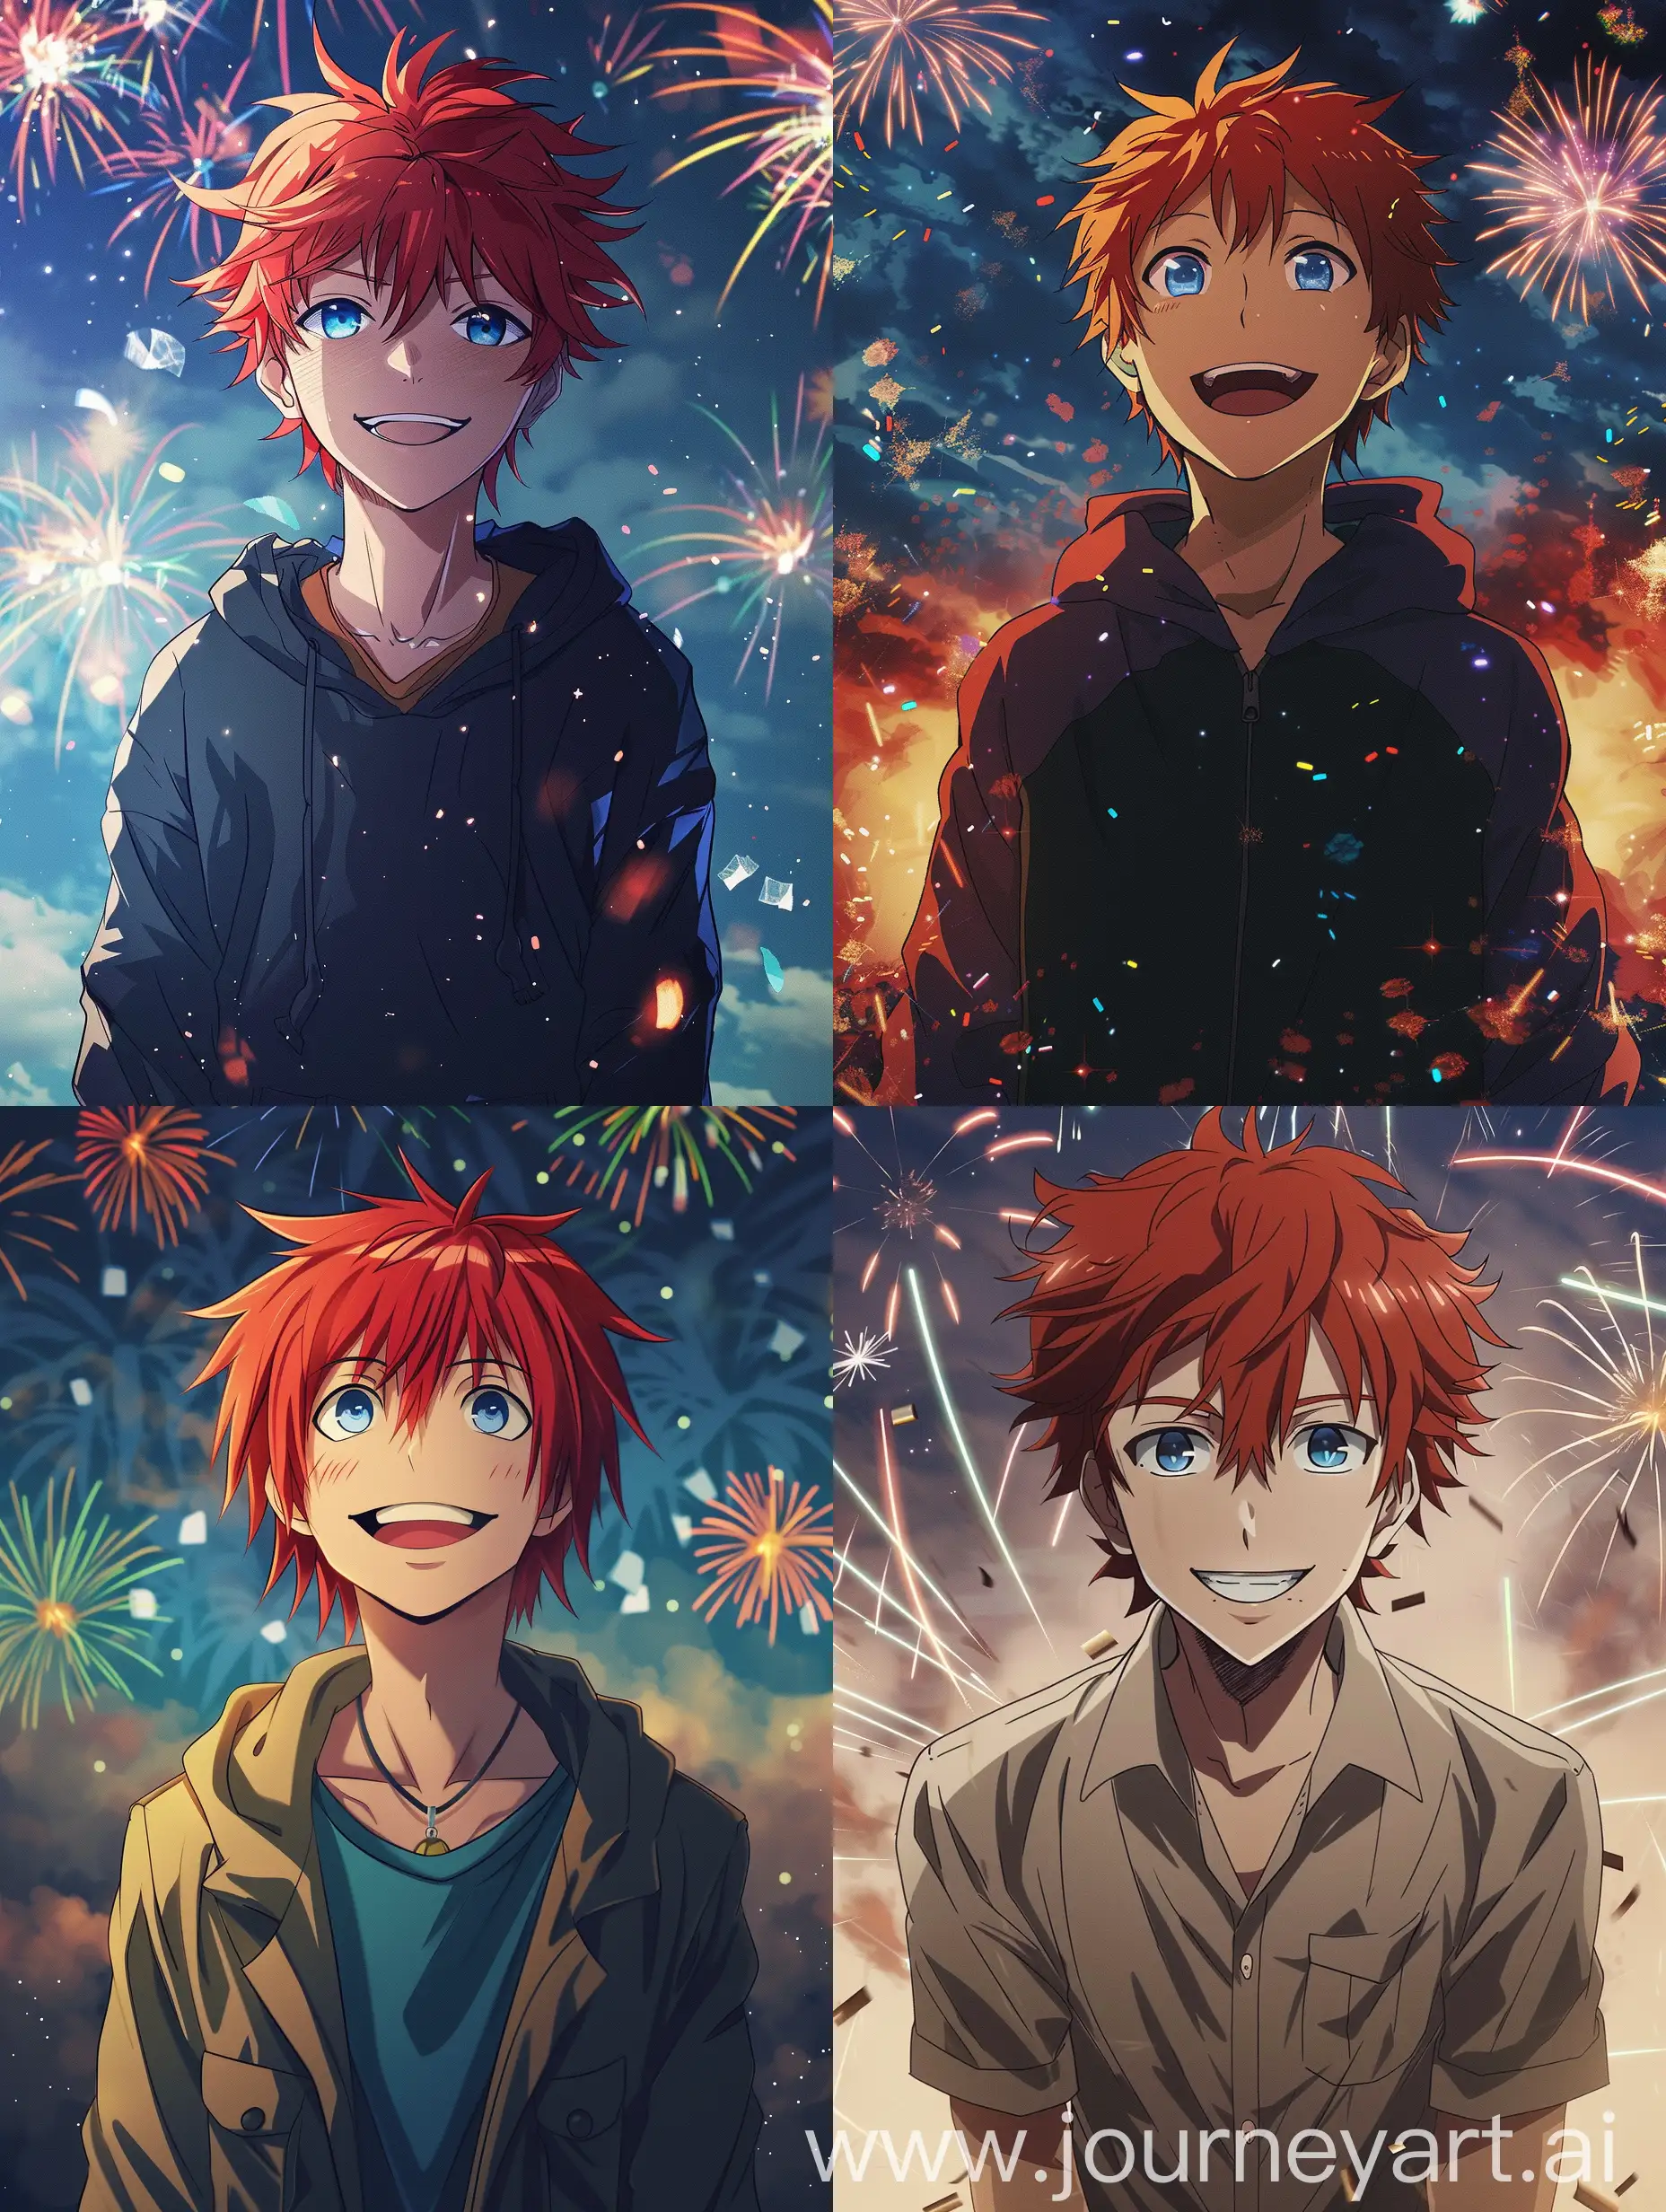 Holiday, fireworks, red-haired young man with blue eyes, standing and smiling, anime style